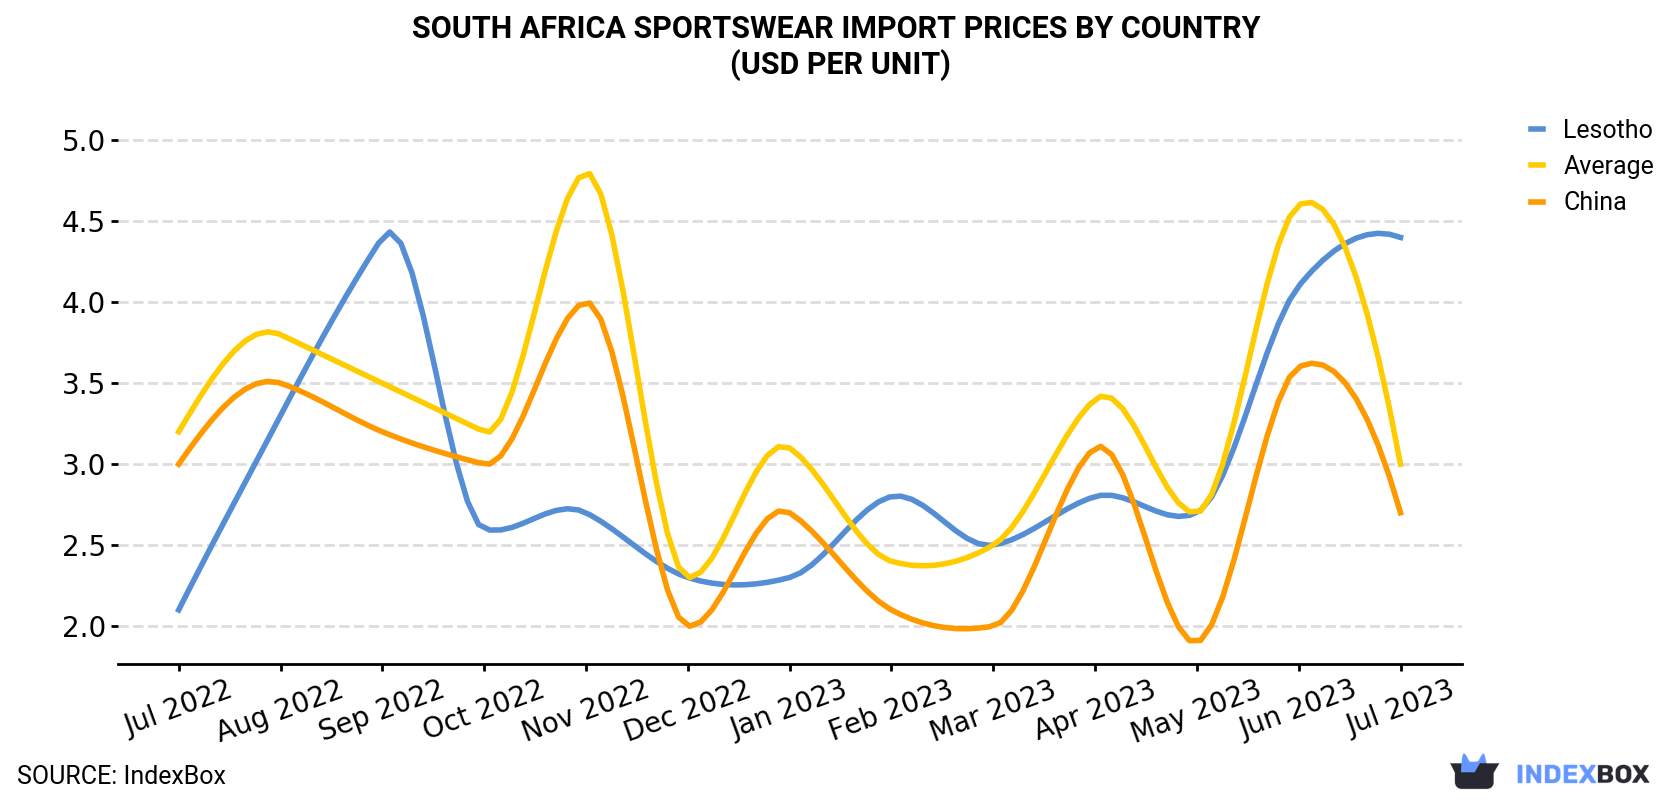 South Africa Sportswear Import Prices By Country (USD Per Unit)